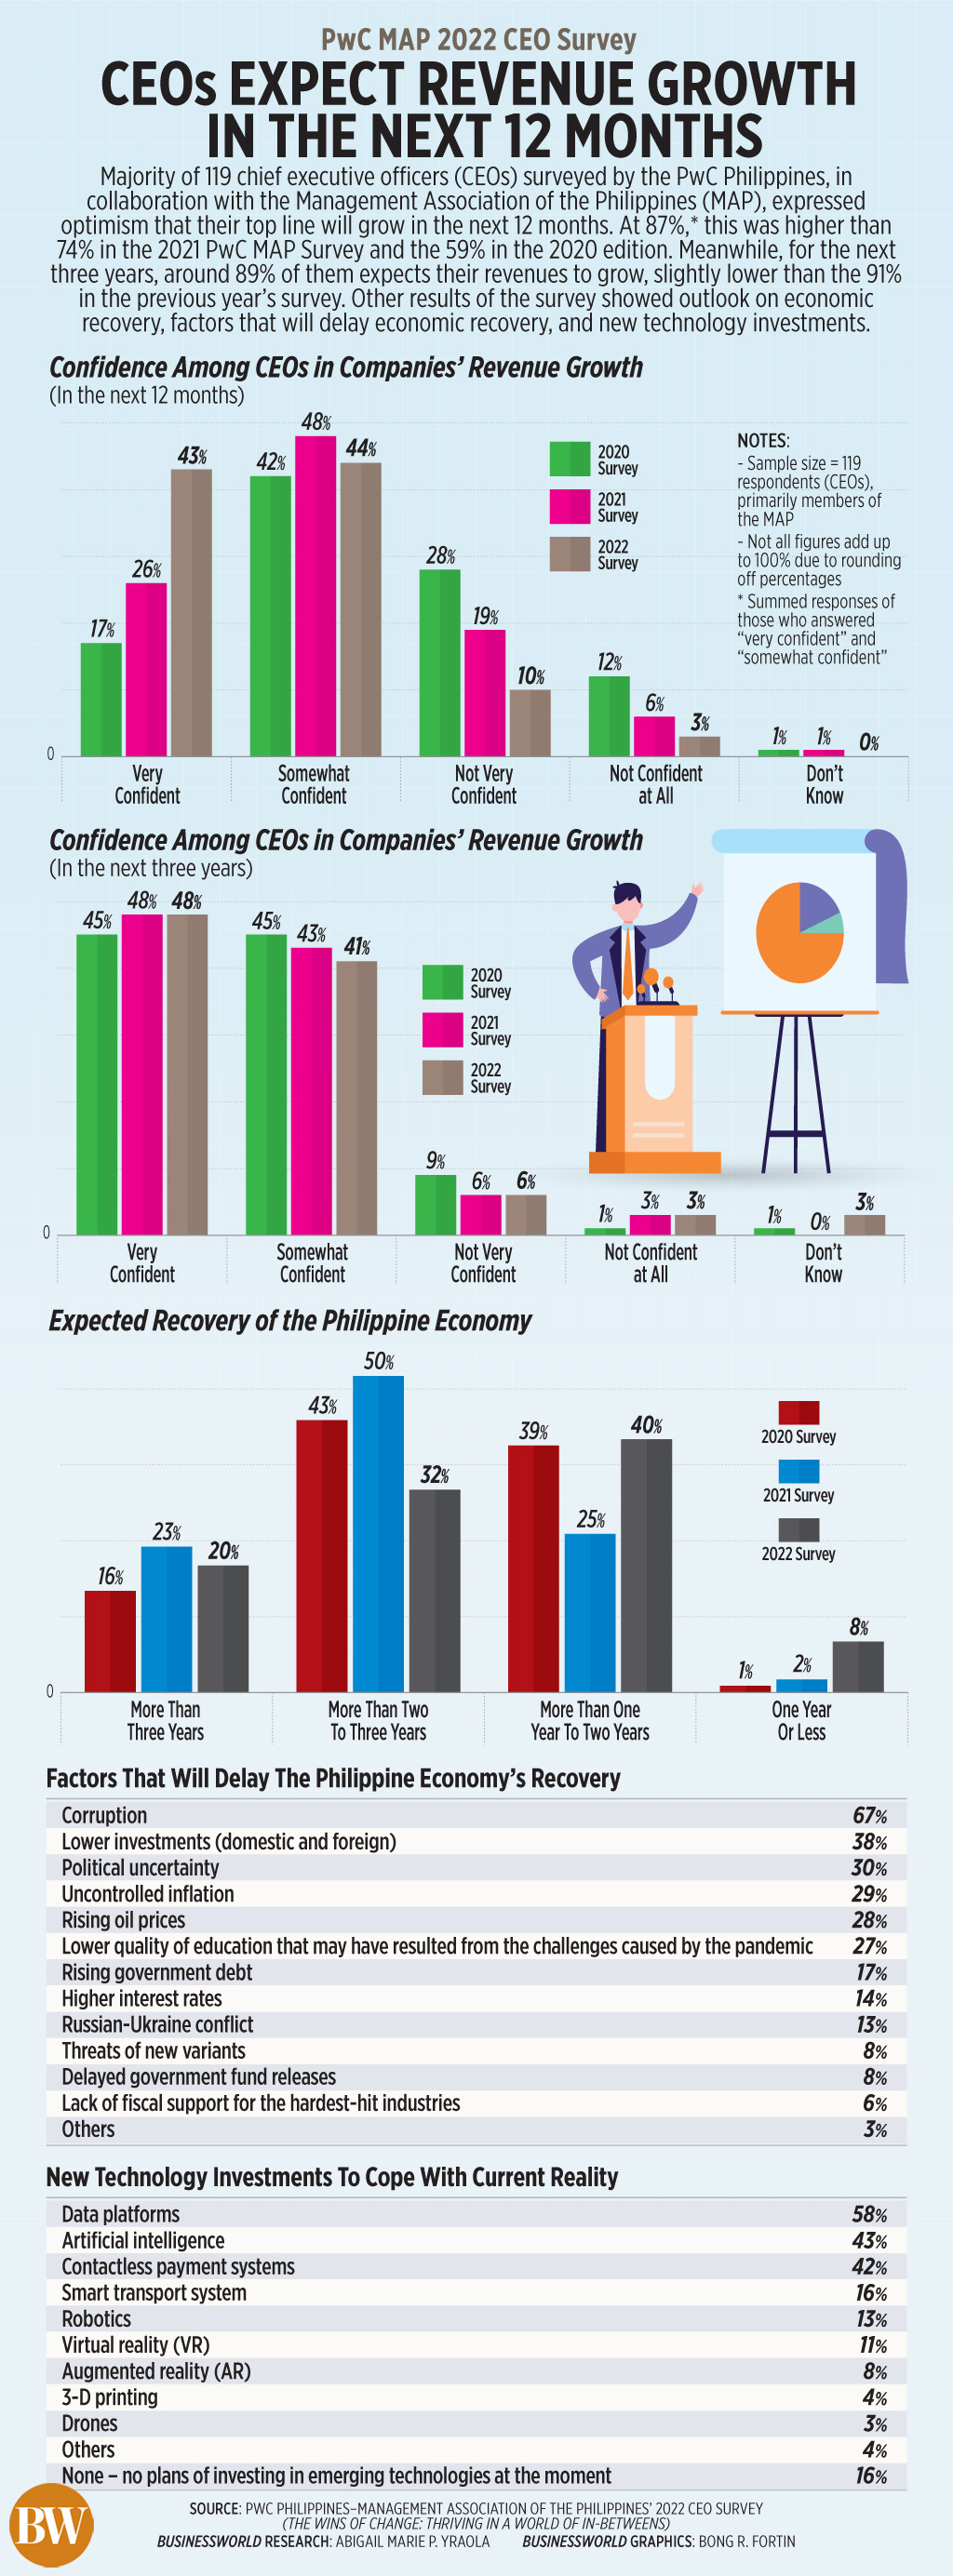 CEOs expect revenue growth in the next 12 months